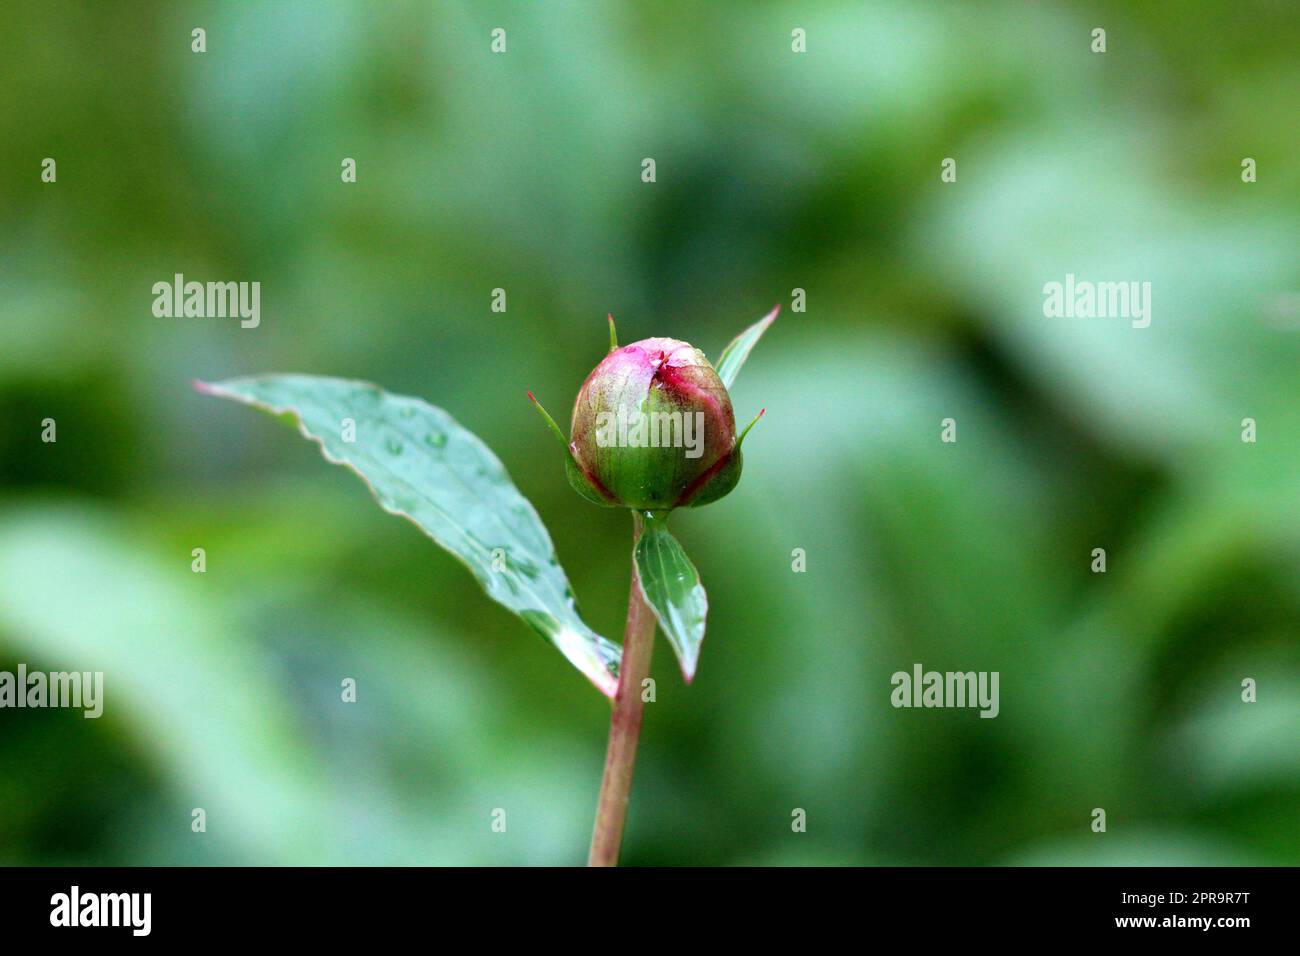 Single Peony or Paeony herbaceous perennial flowering plant small flower bud covered with raindrops from fresh spring shower starting to open Stock Photo